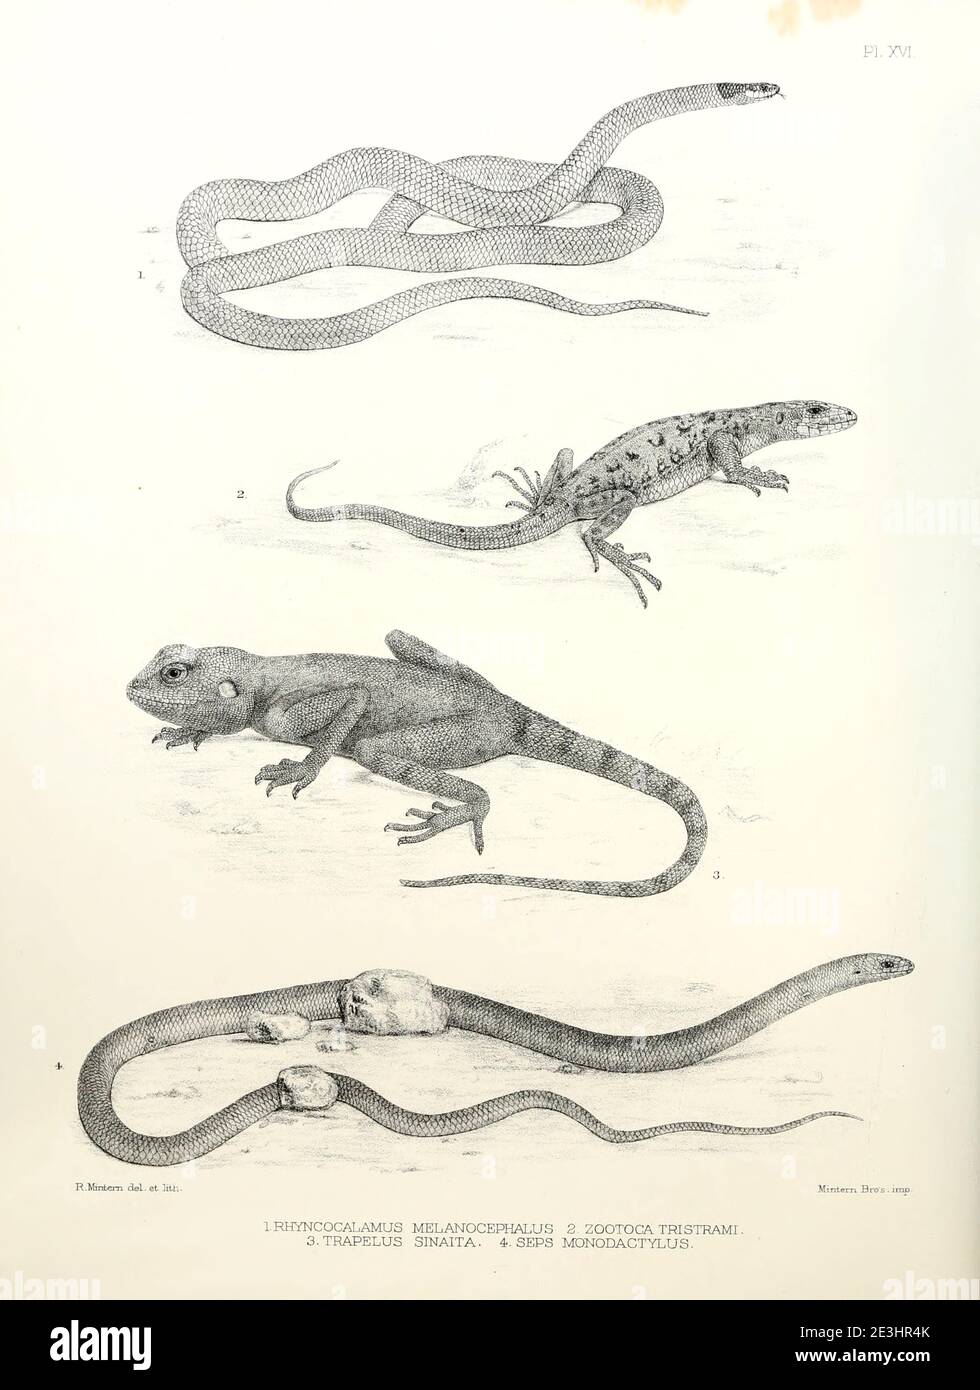 Snakes and Lizards : Rhyncocalamus melanocephalus, Zootoca tristrami, Trapelus sinaita, Seps monodactylus From the survey of western Palestine. The fauna and flora of Palestine by Tristram, H. B. (Henry Baker), 1822-1906 Published by The Committee of the Palestine Exploration Fund, London, 1884 Stock Photo